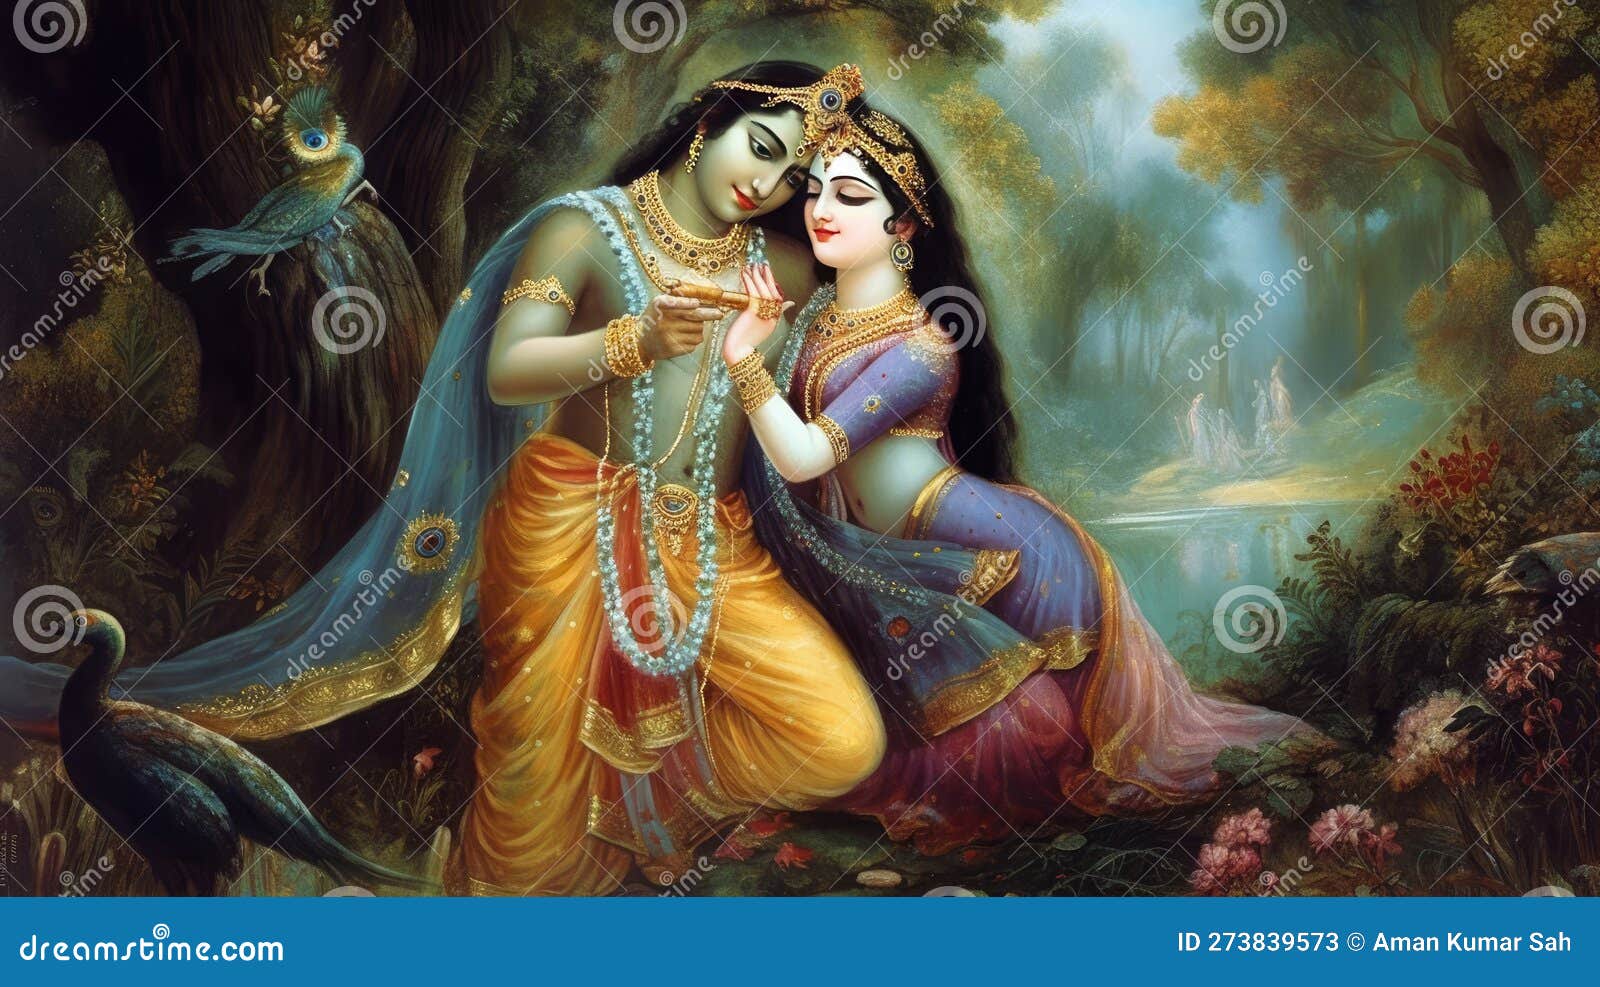 Lord Radha Krishna are Known for Their Divine Love and Devotion ...